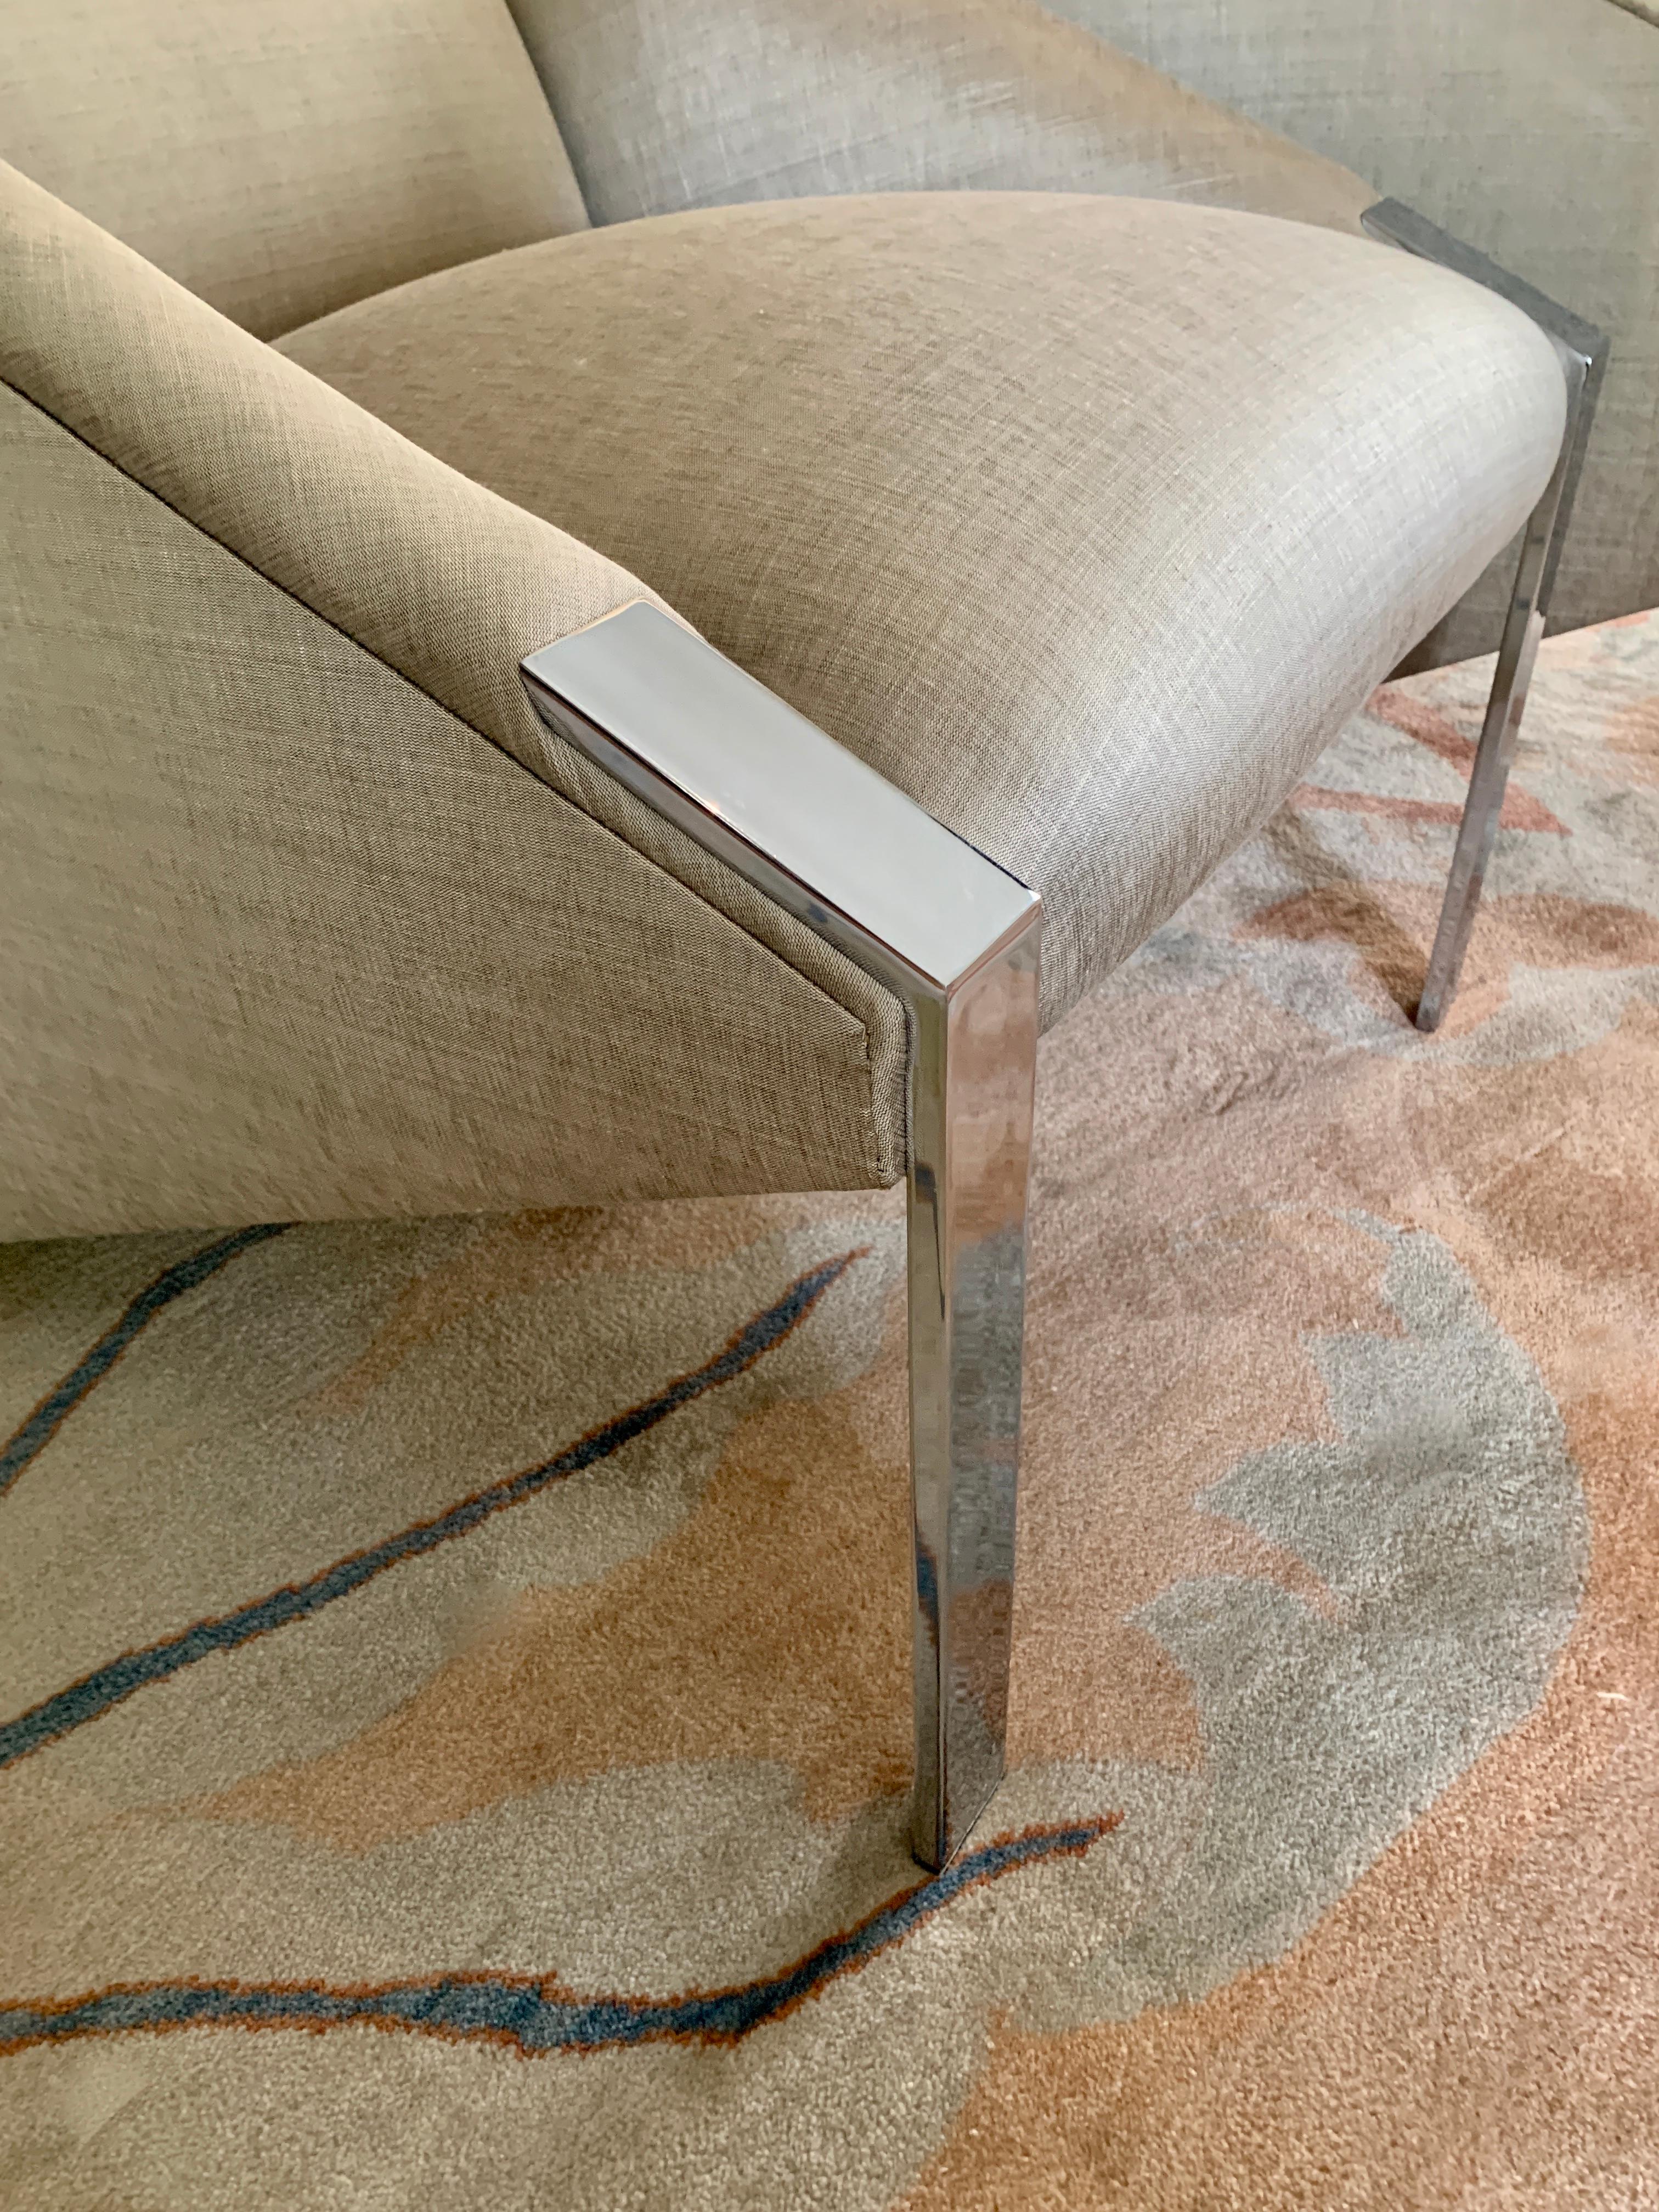 Polished Andree Putman Pair Chrome Lounge Side Chairs in Silk Upholstery